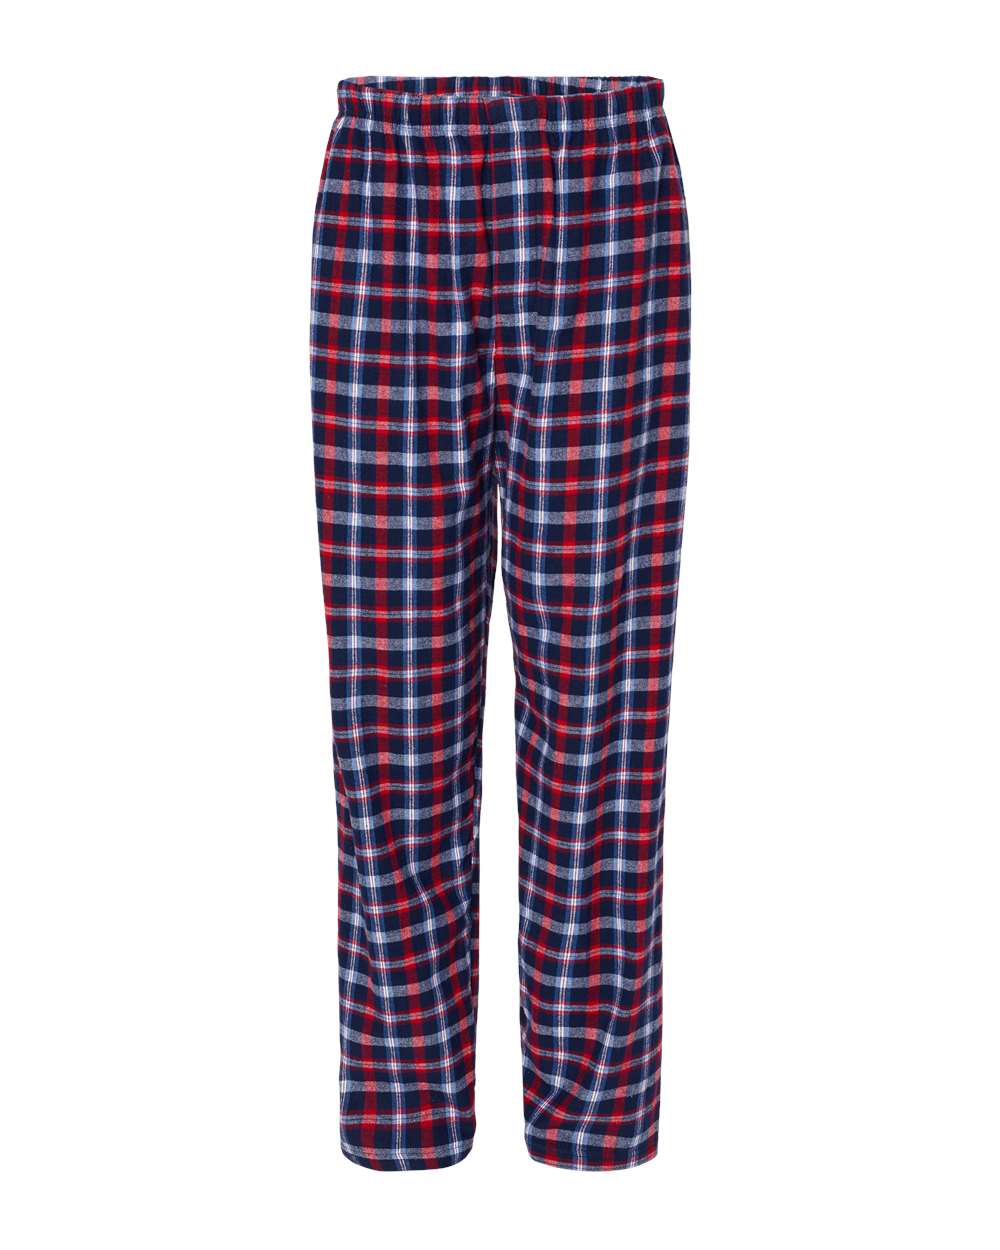 Boxercraft Unisex Flannel Pants Red and Blue Flannel Pants with Custom Text